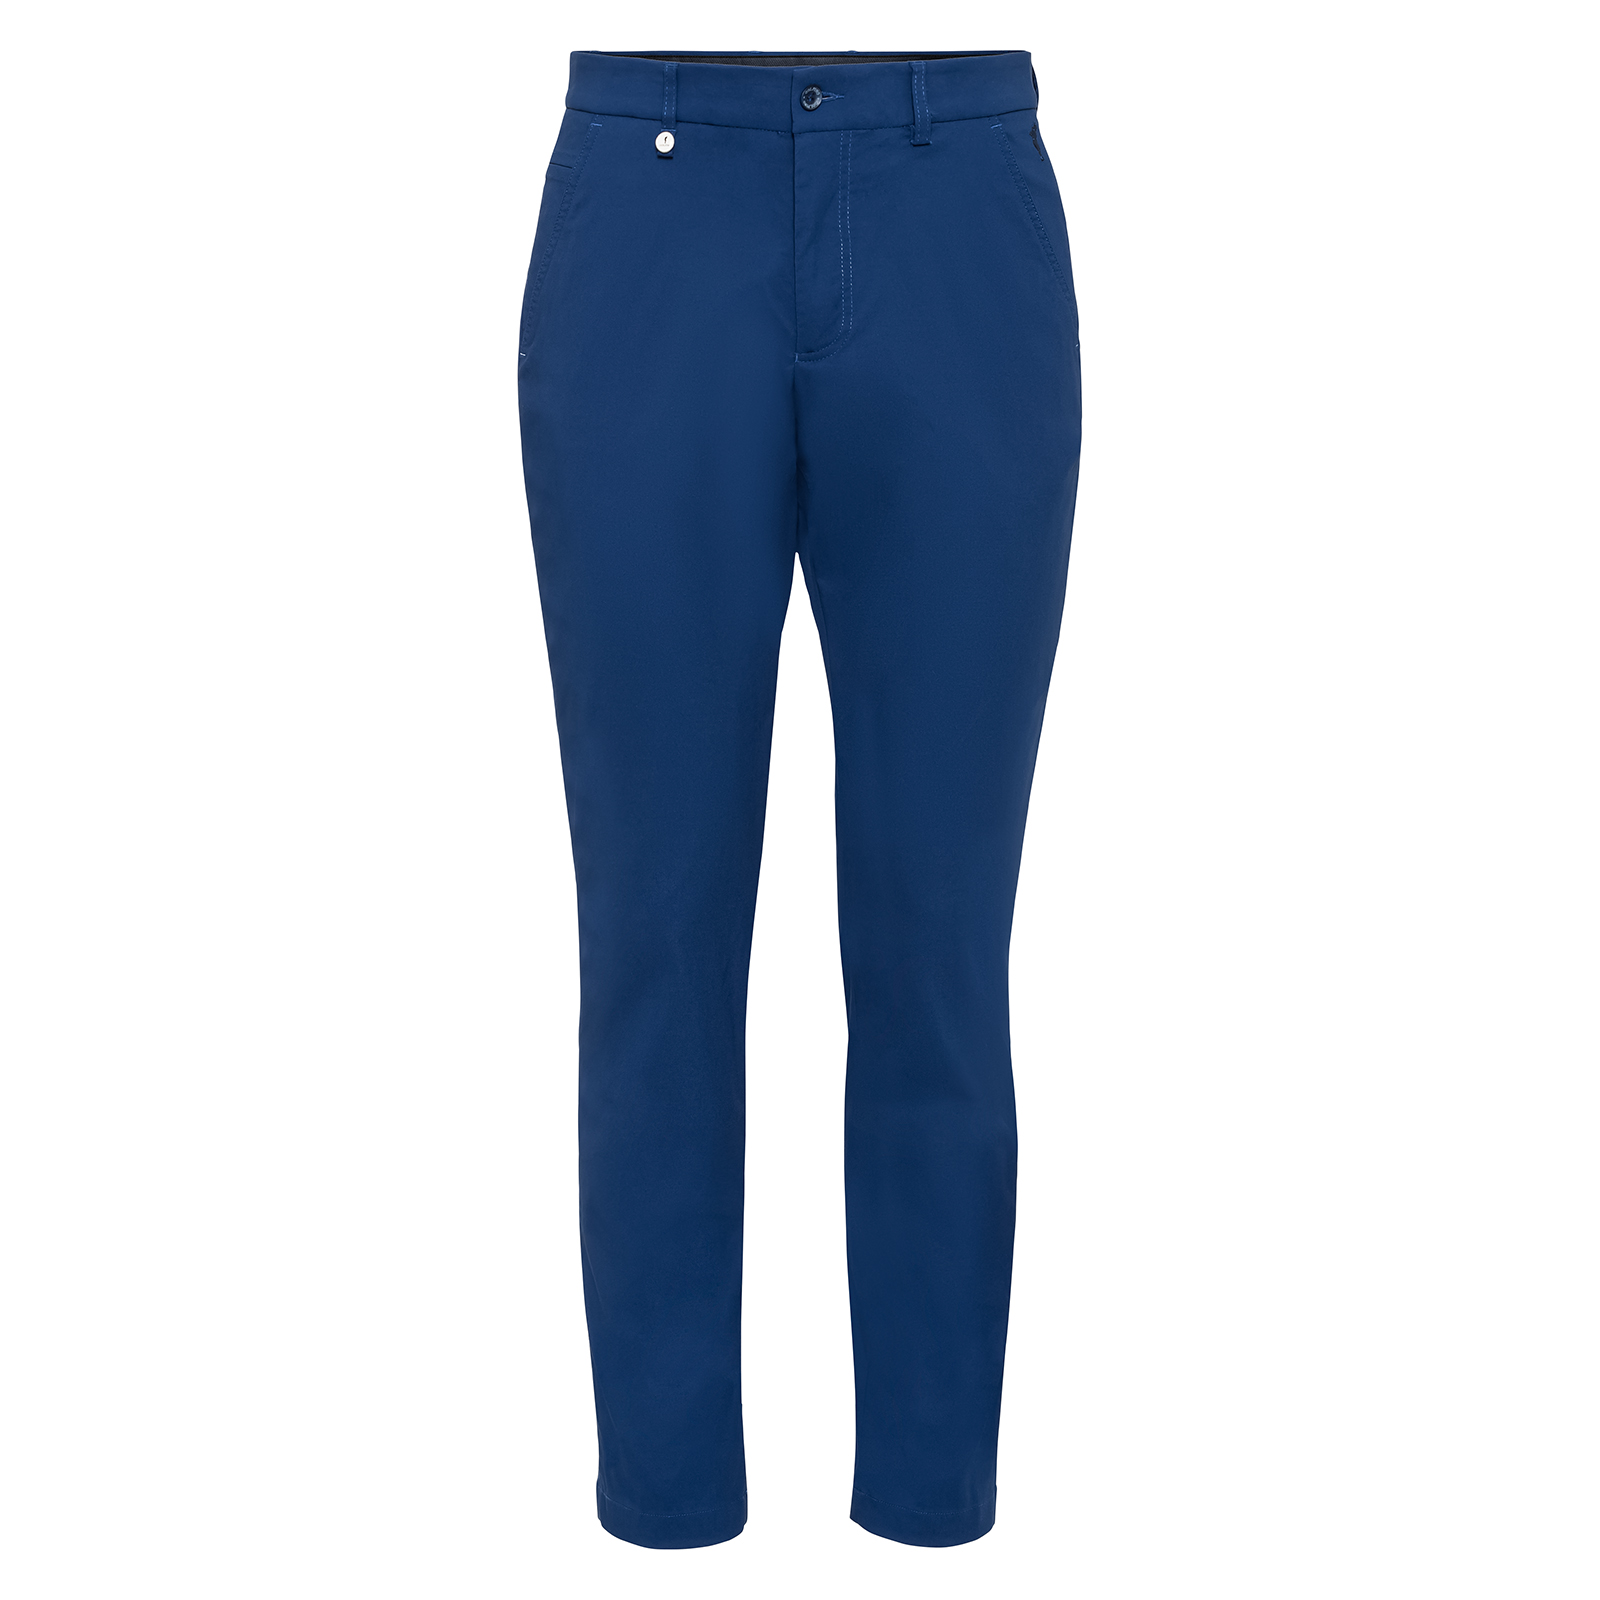 Men's golf trousers with stretch component